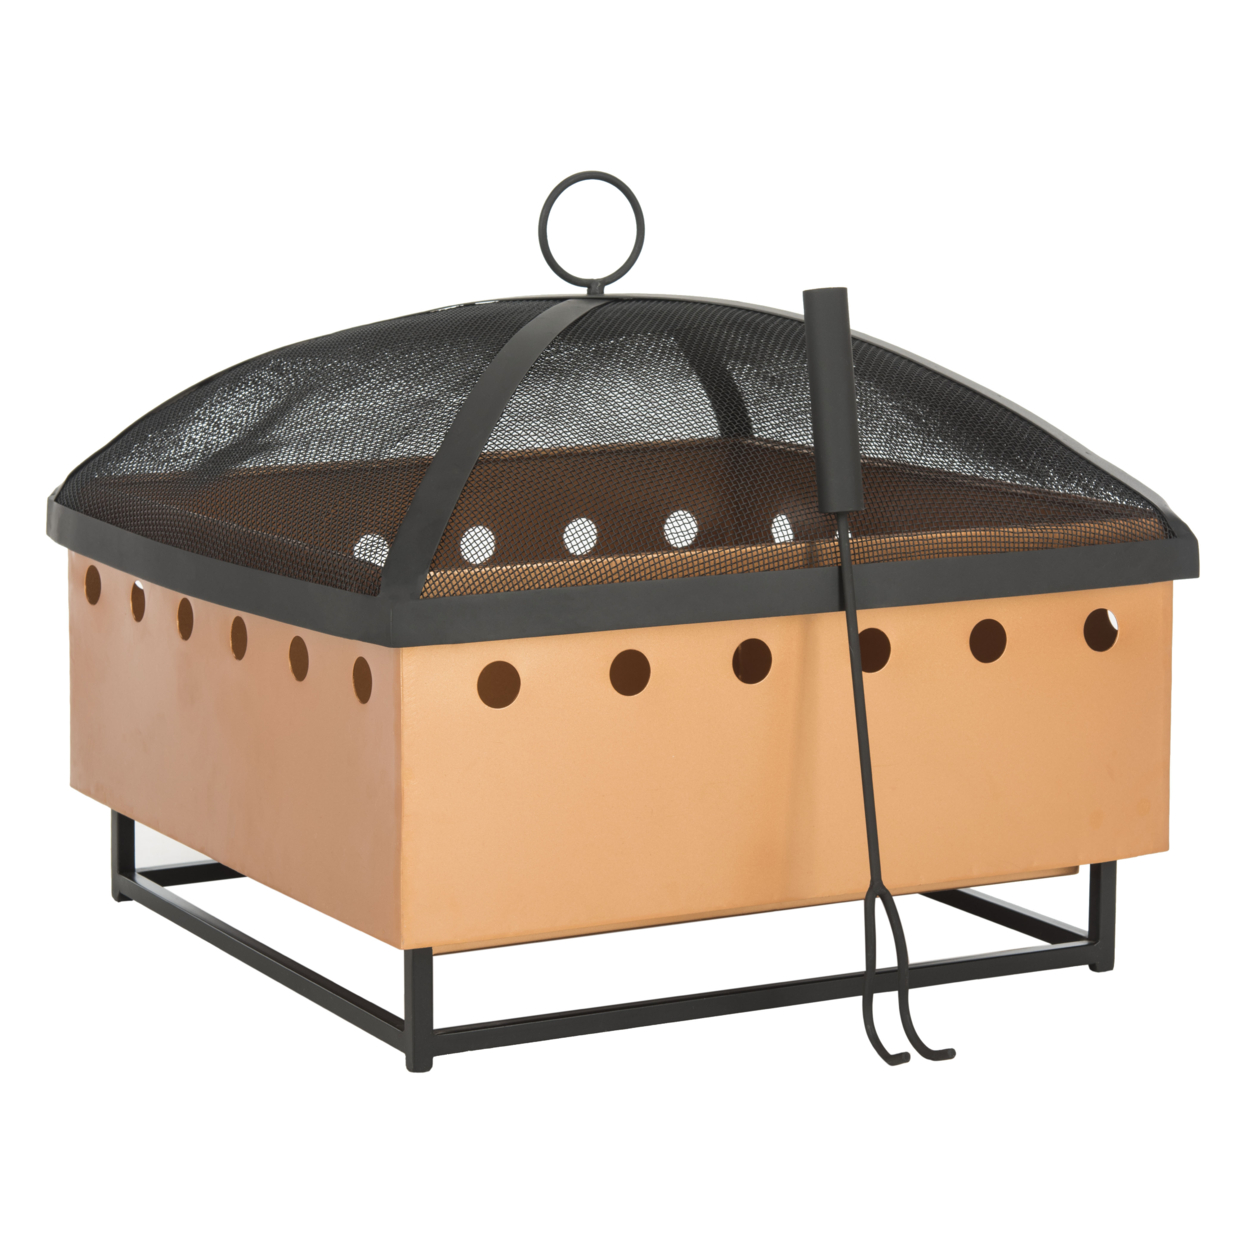 SAFAVIEH Outdoor Collection Wyatt Square Fire Pit Copper/Black